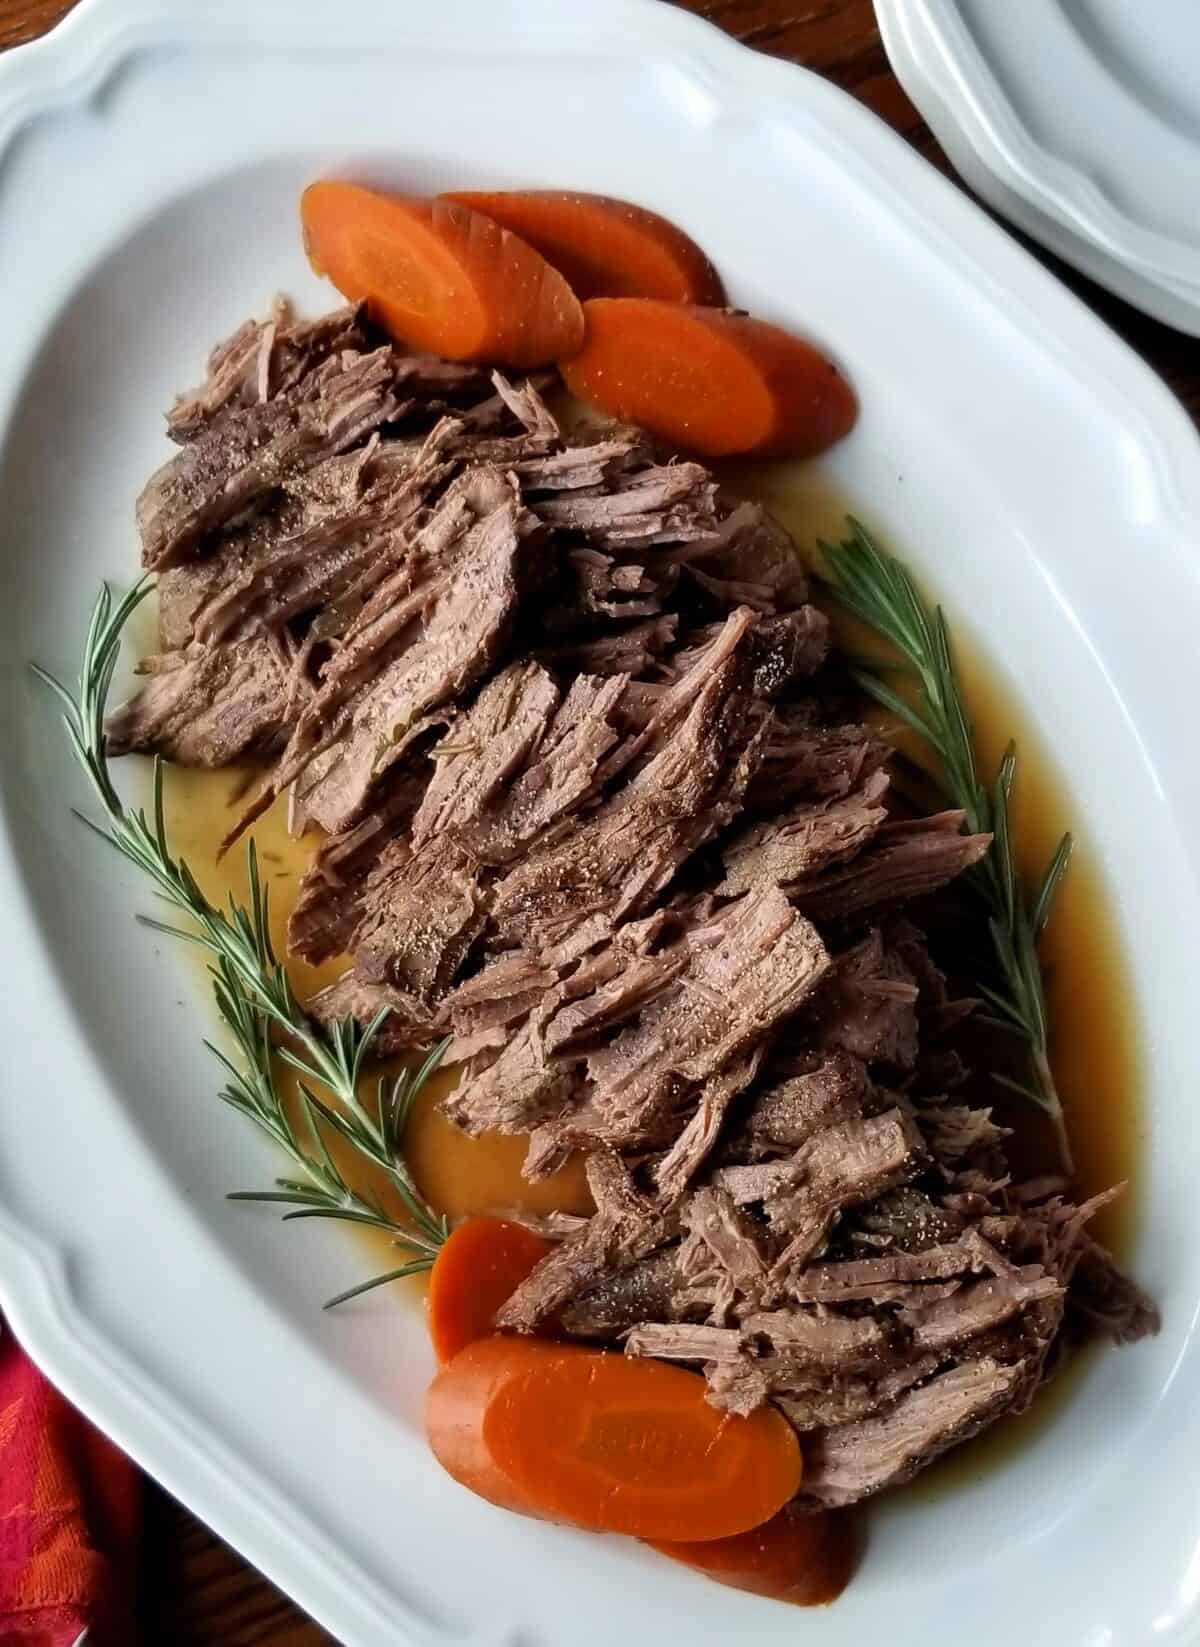  Rich and savory aromas will fill your home while this pot roast cooks